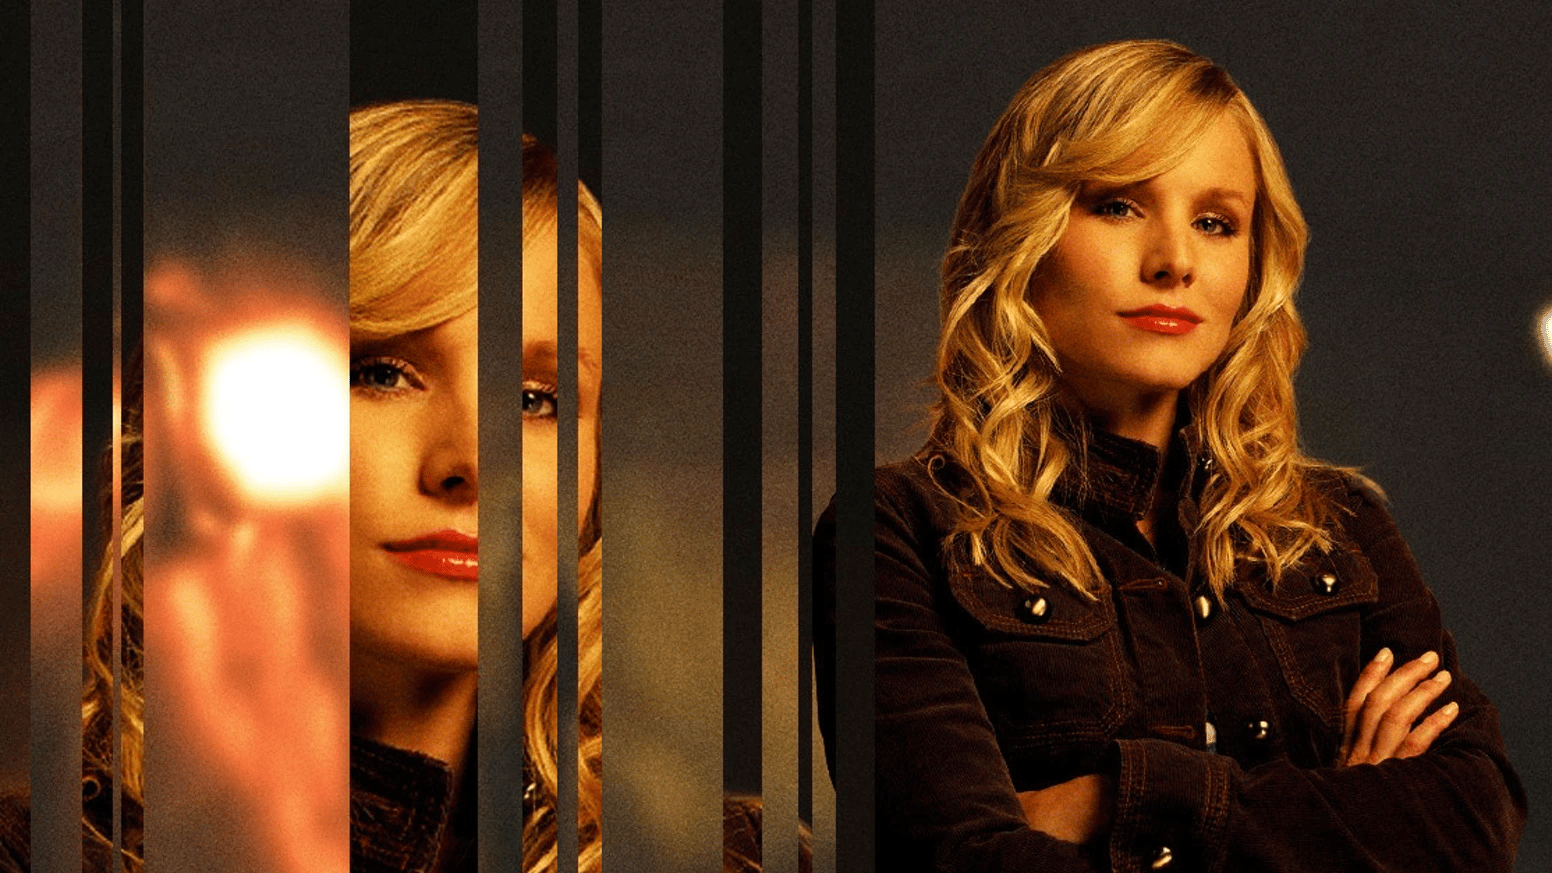 The Veronica Mars Movie Project is one of the most successful kickstarter campaigns.